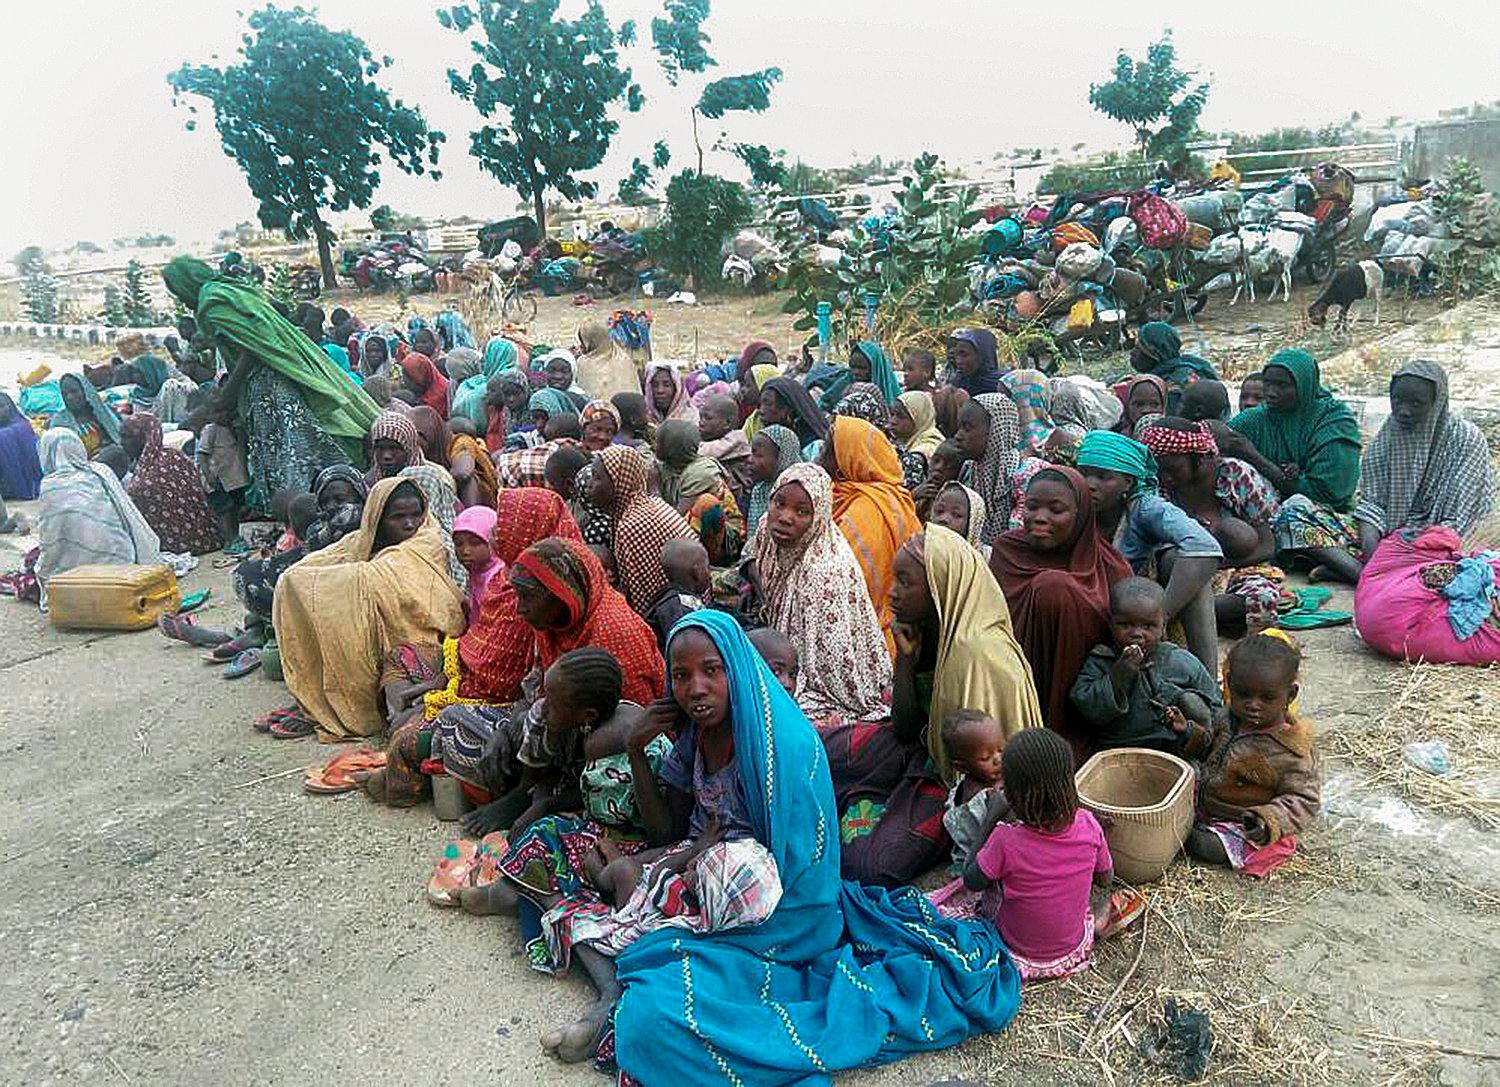 epa06413768 Some of the 700 persons rescued from Boko Haram lslamic militants by Nigerian Army, in Monguno, Nigeria, 02 January 2018. According to the Deputy Director, Army Public Relations over 700 persons abducted by Boko Haram insurgents had escaped from their captors and were received by the 242 Battalion of Nigeria troops in Monguno. The abductees comprising men, women and children were forced to work as farm labourers by the insurgents.  EPA/DEJI YAKE BEST QUALITY AVAILABLE NIGERIA TERRORISM BOKO HARAM